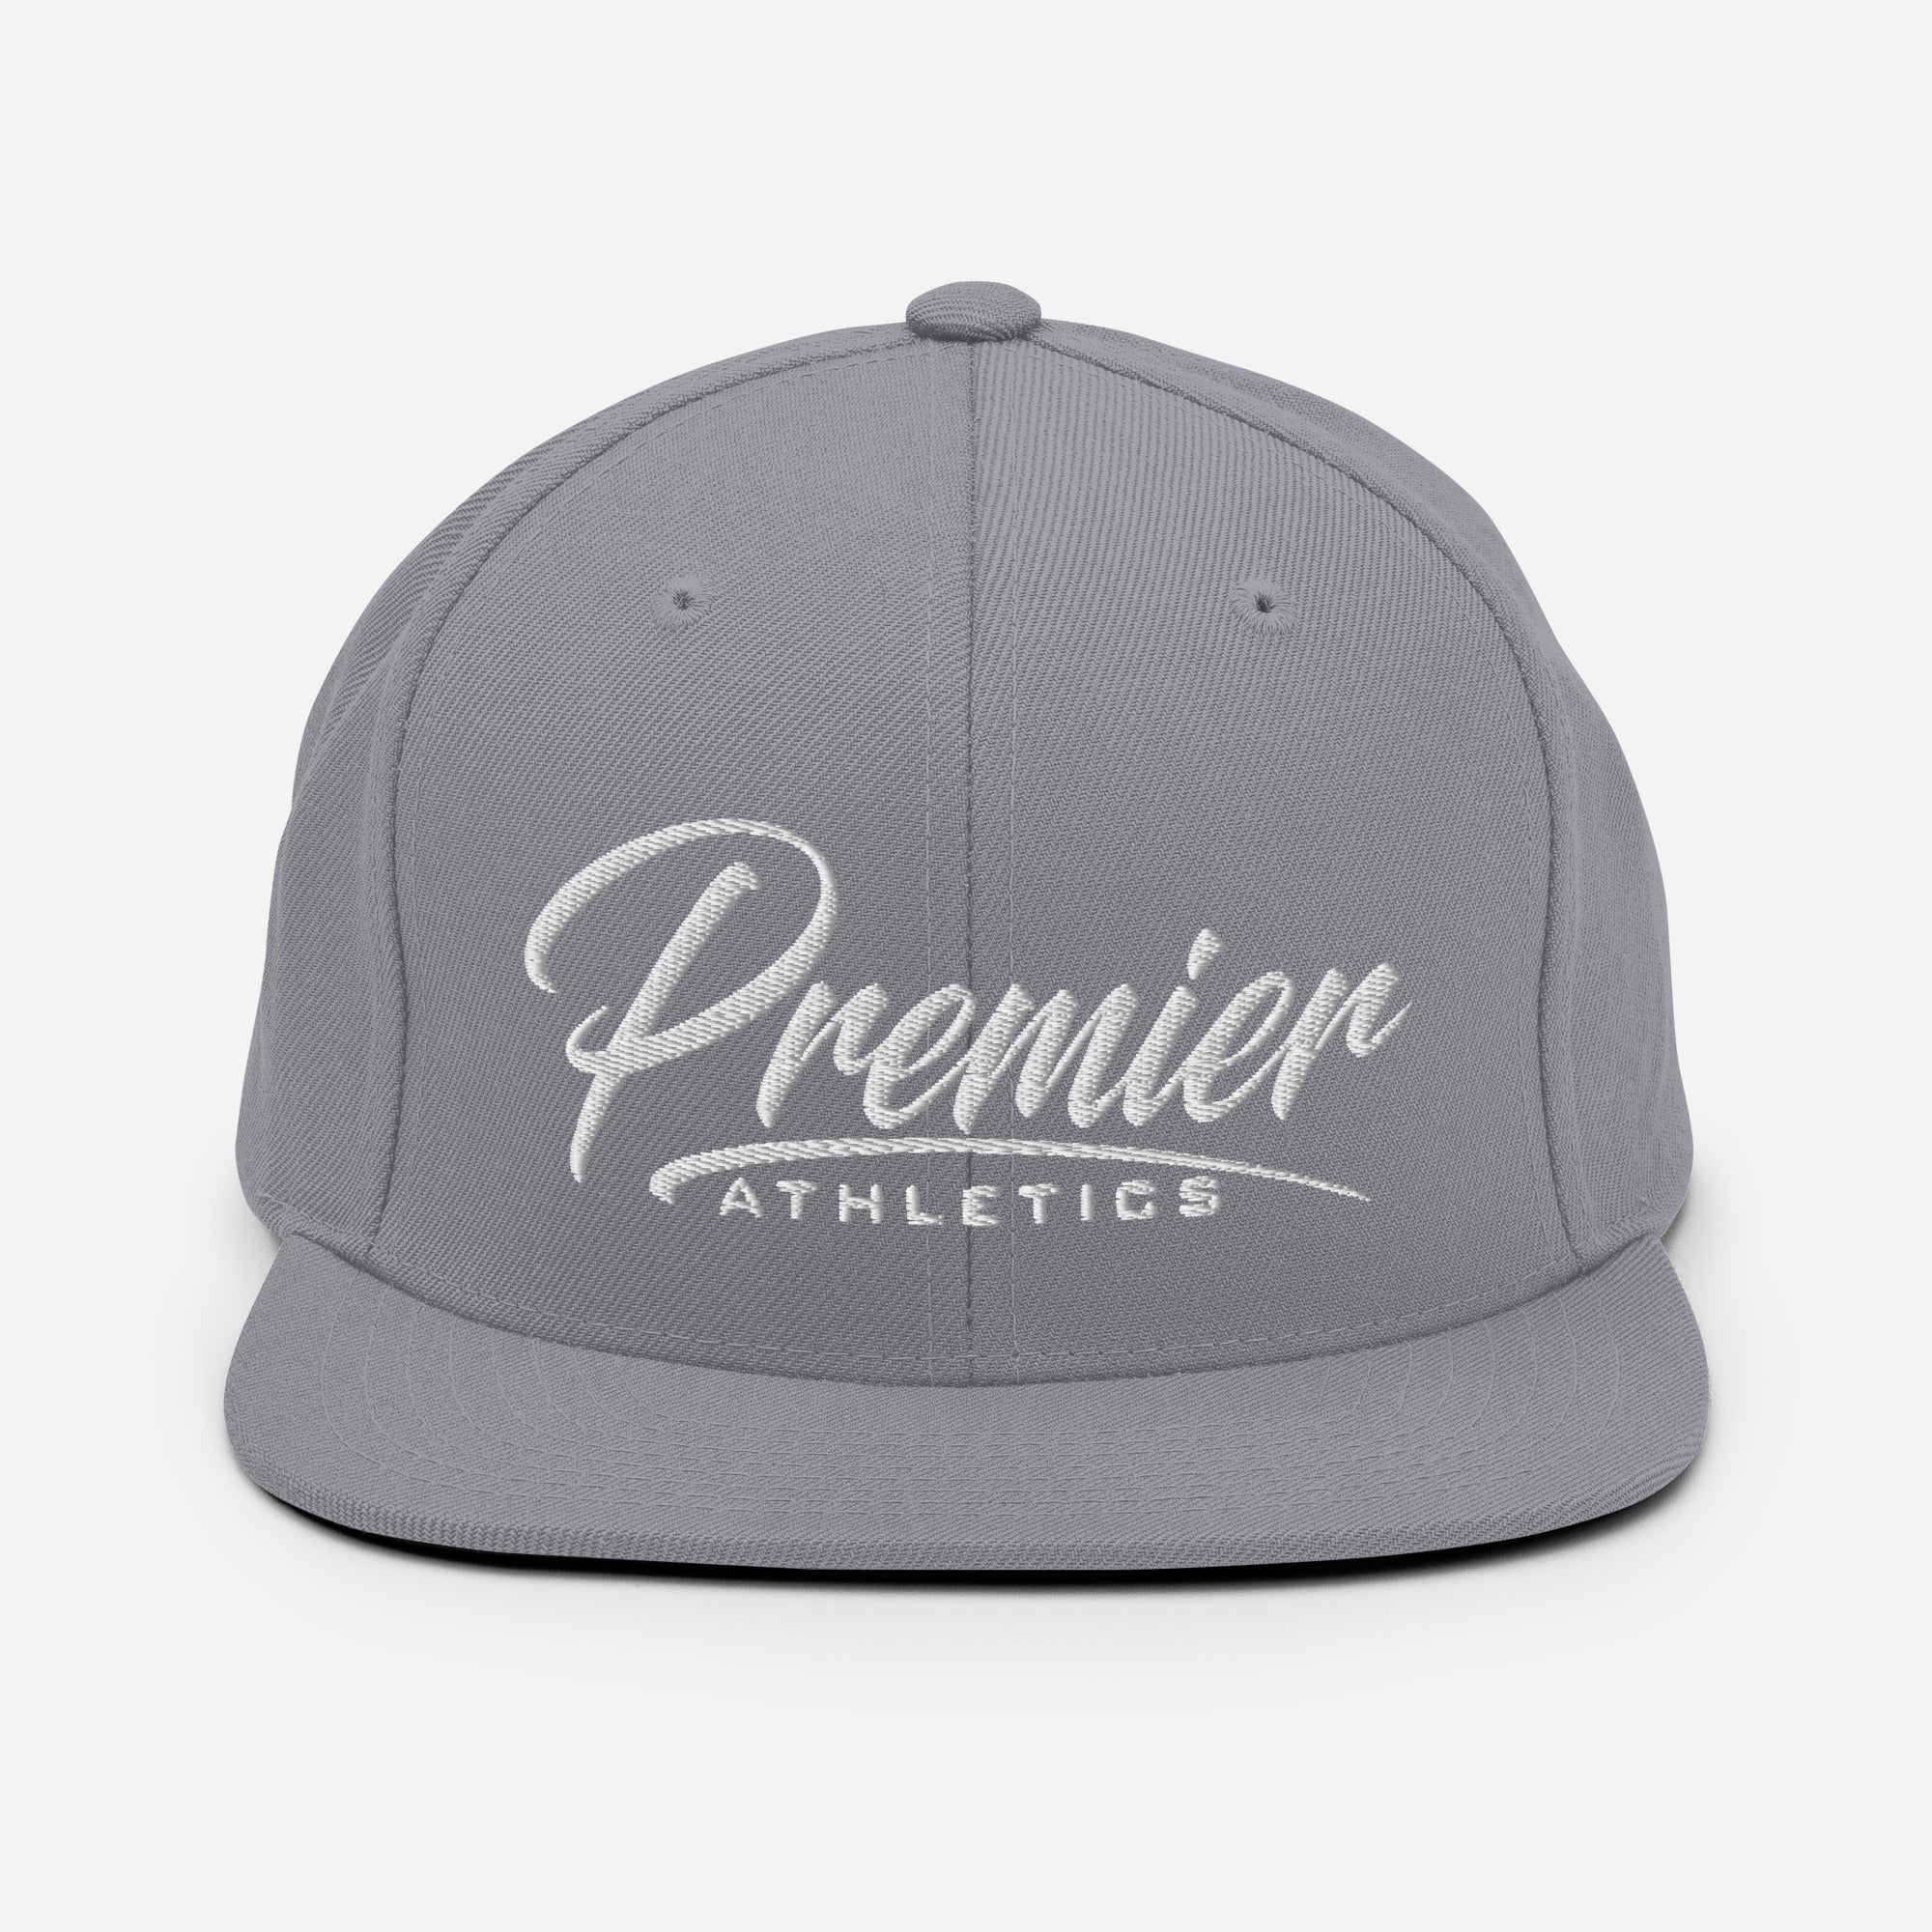 Premier Promotional Products100% ACRYLIC SNAPBACK BASEBALL CAP in